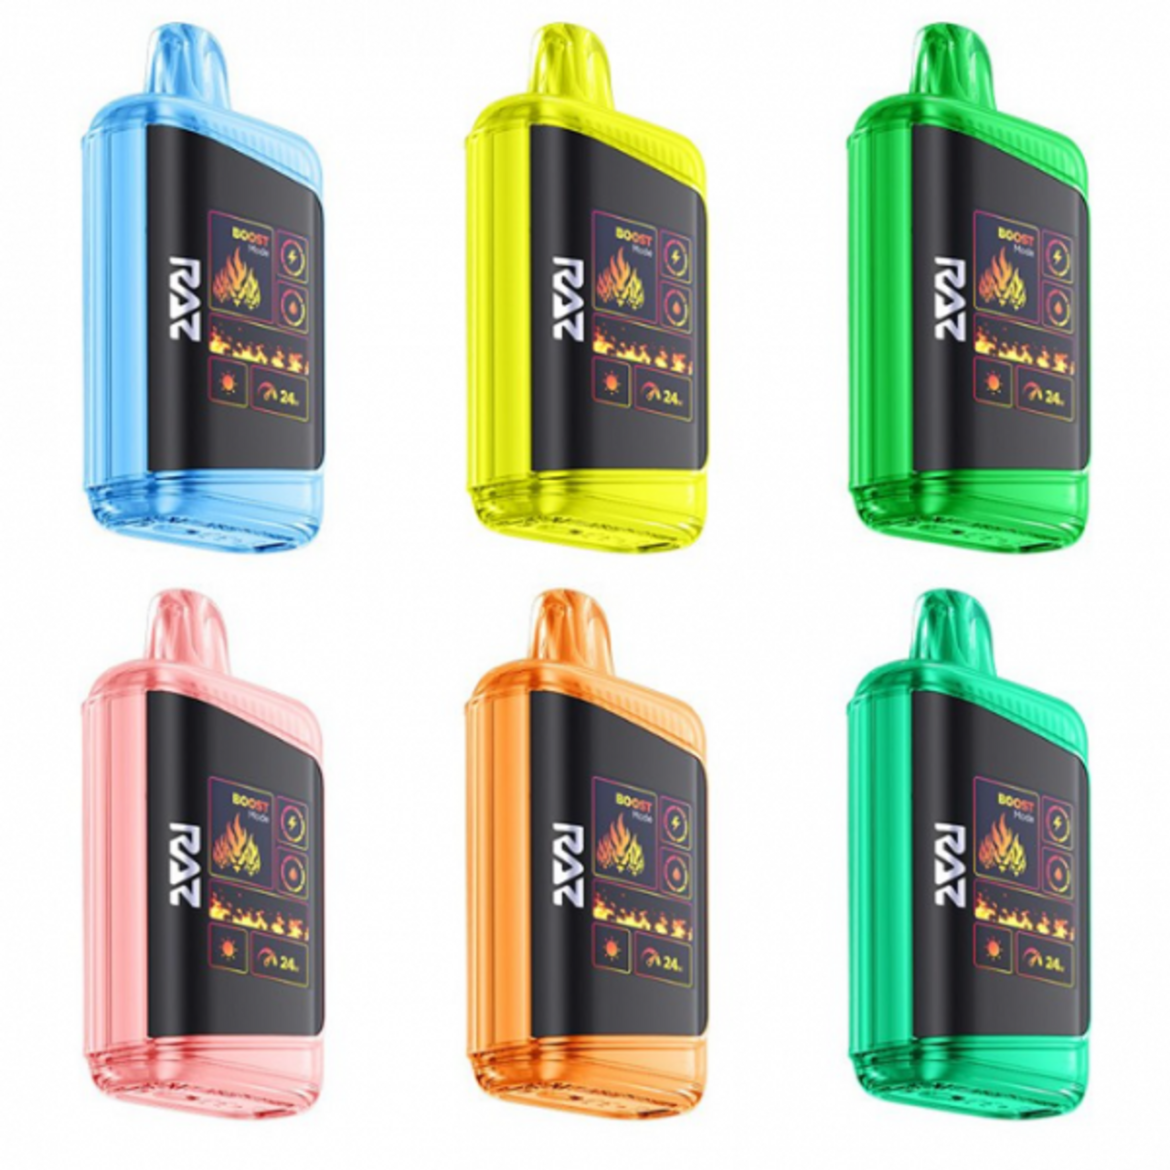 Loon Nyxx Tobacco Free Nicotine Pouches: A Game-Changer in Nicotine Consumption